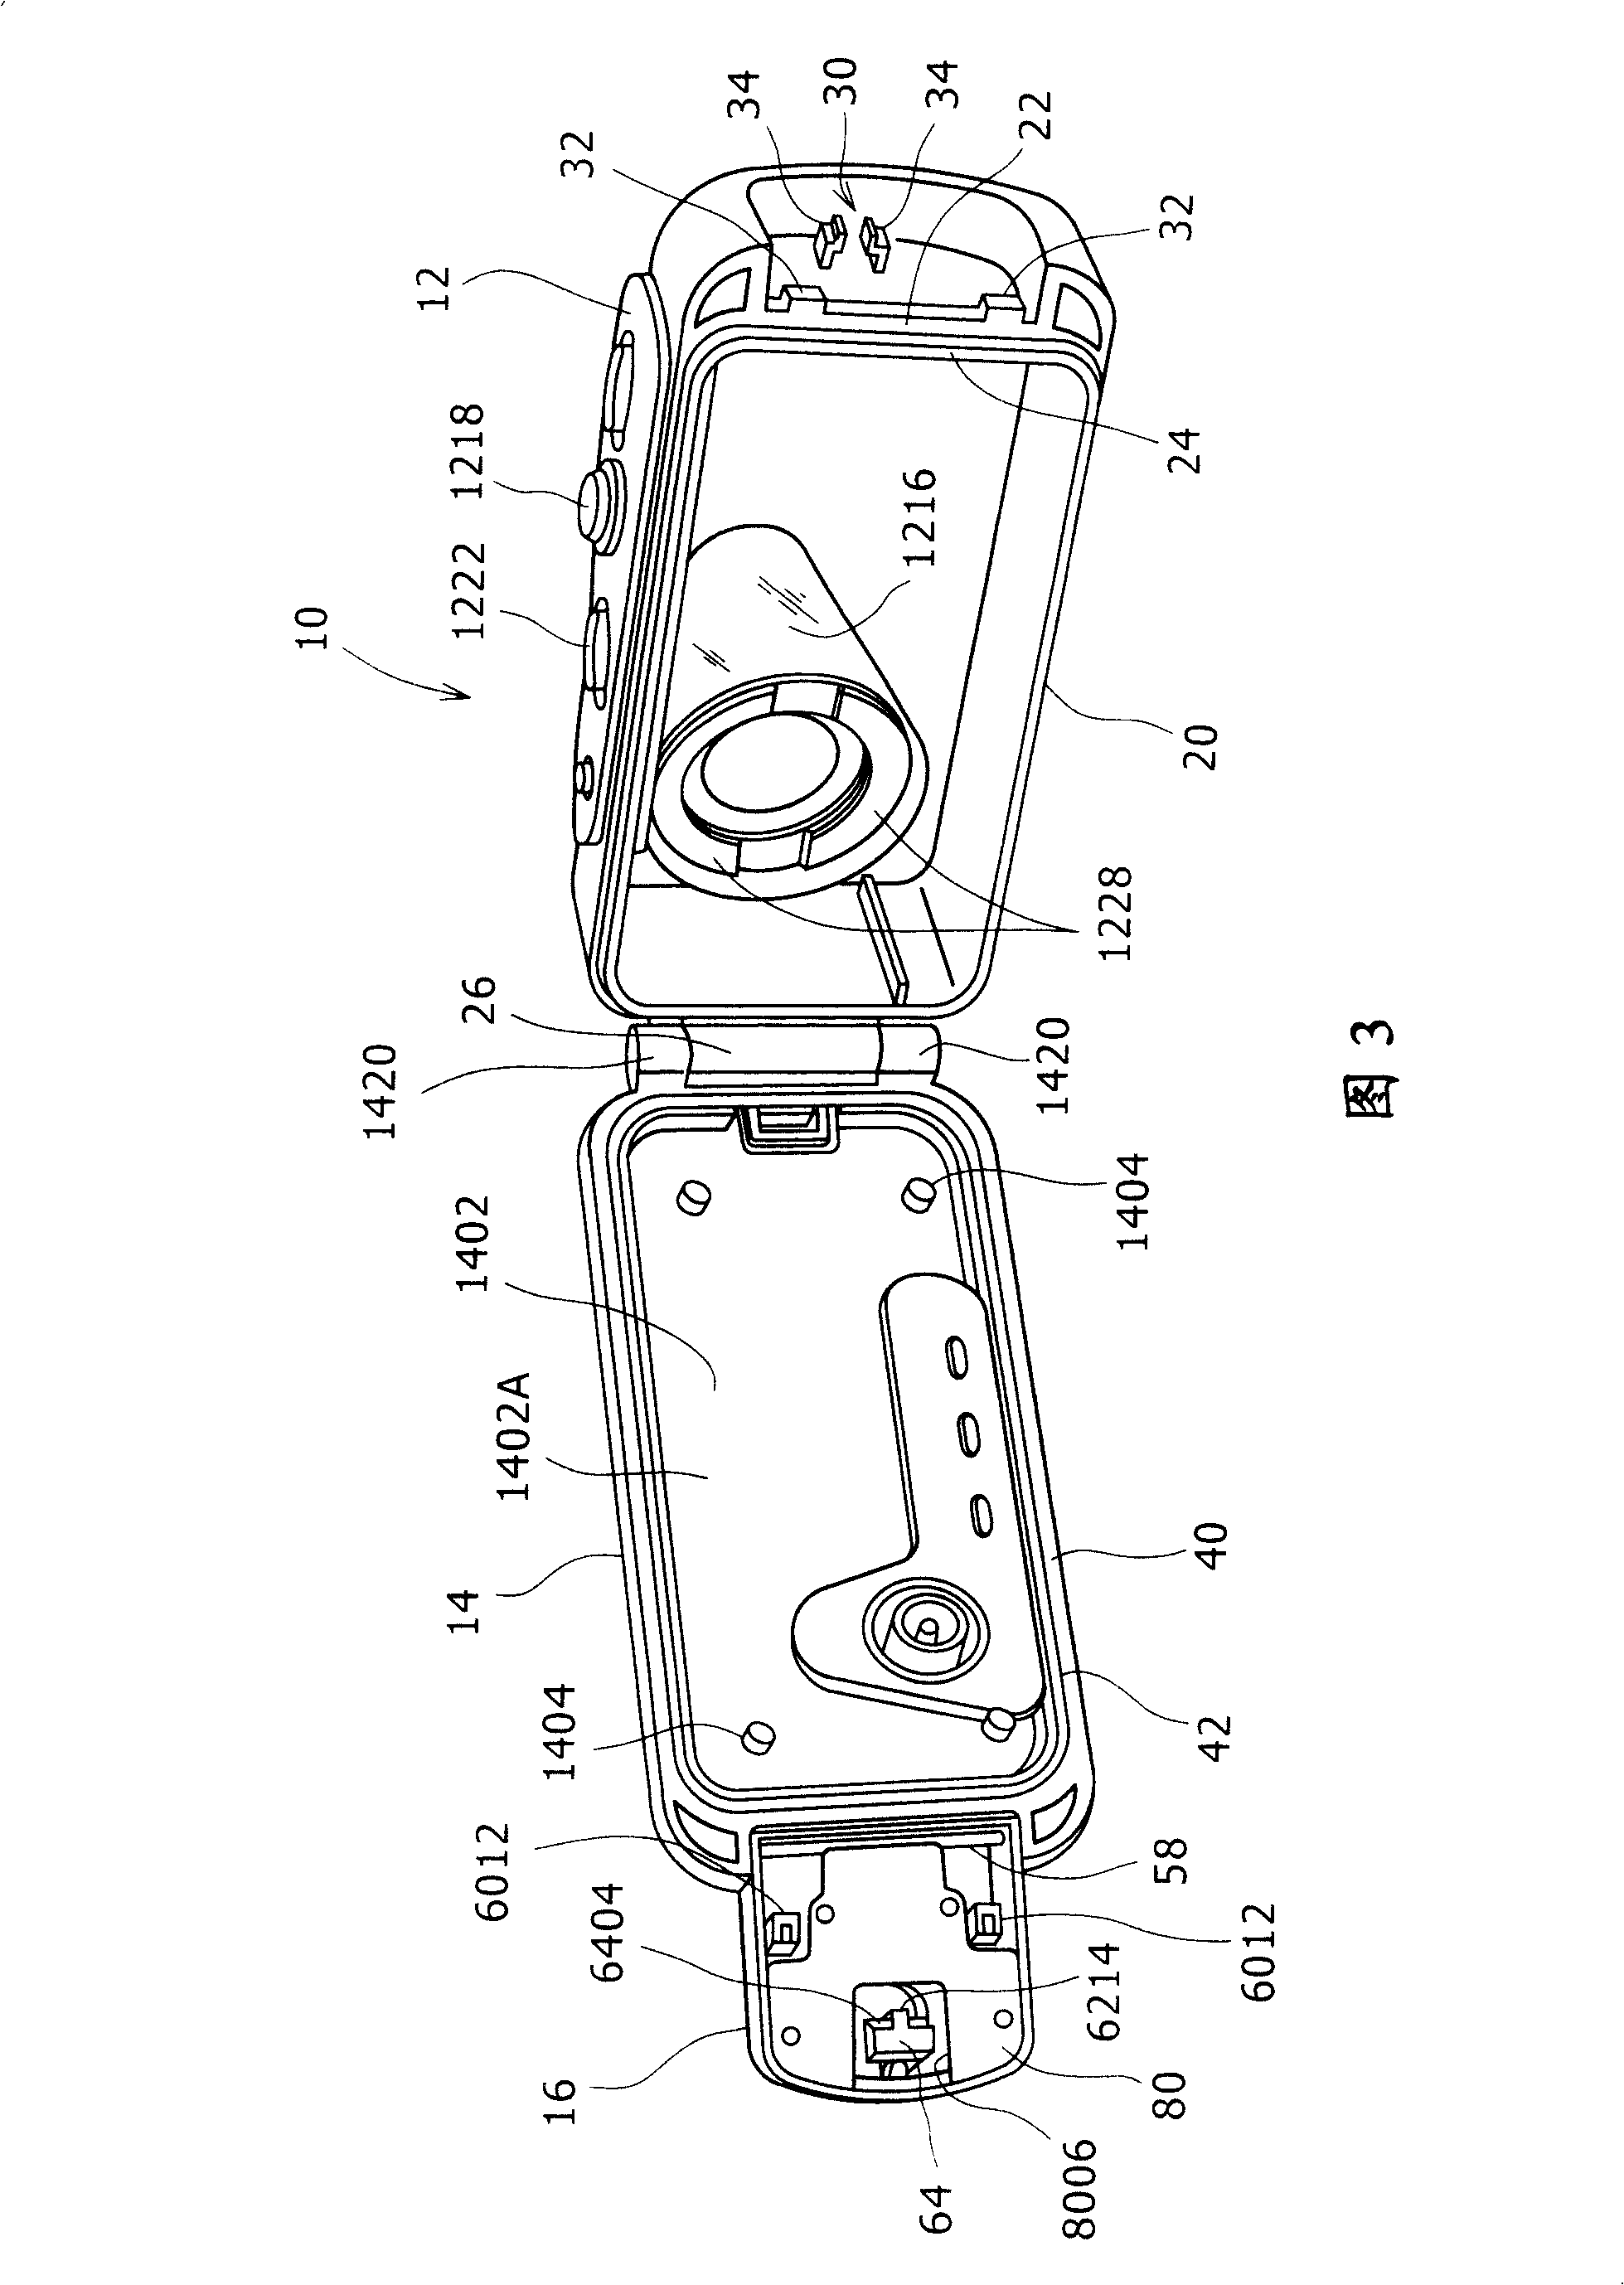 Water-resistant case for electronic devices